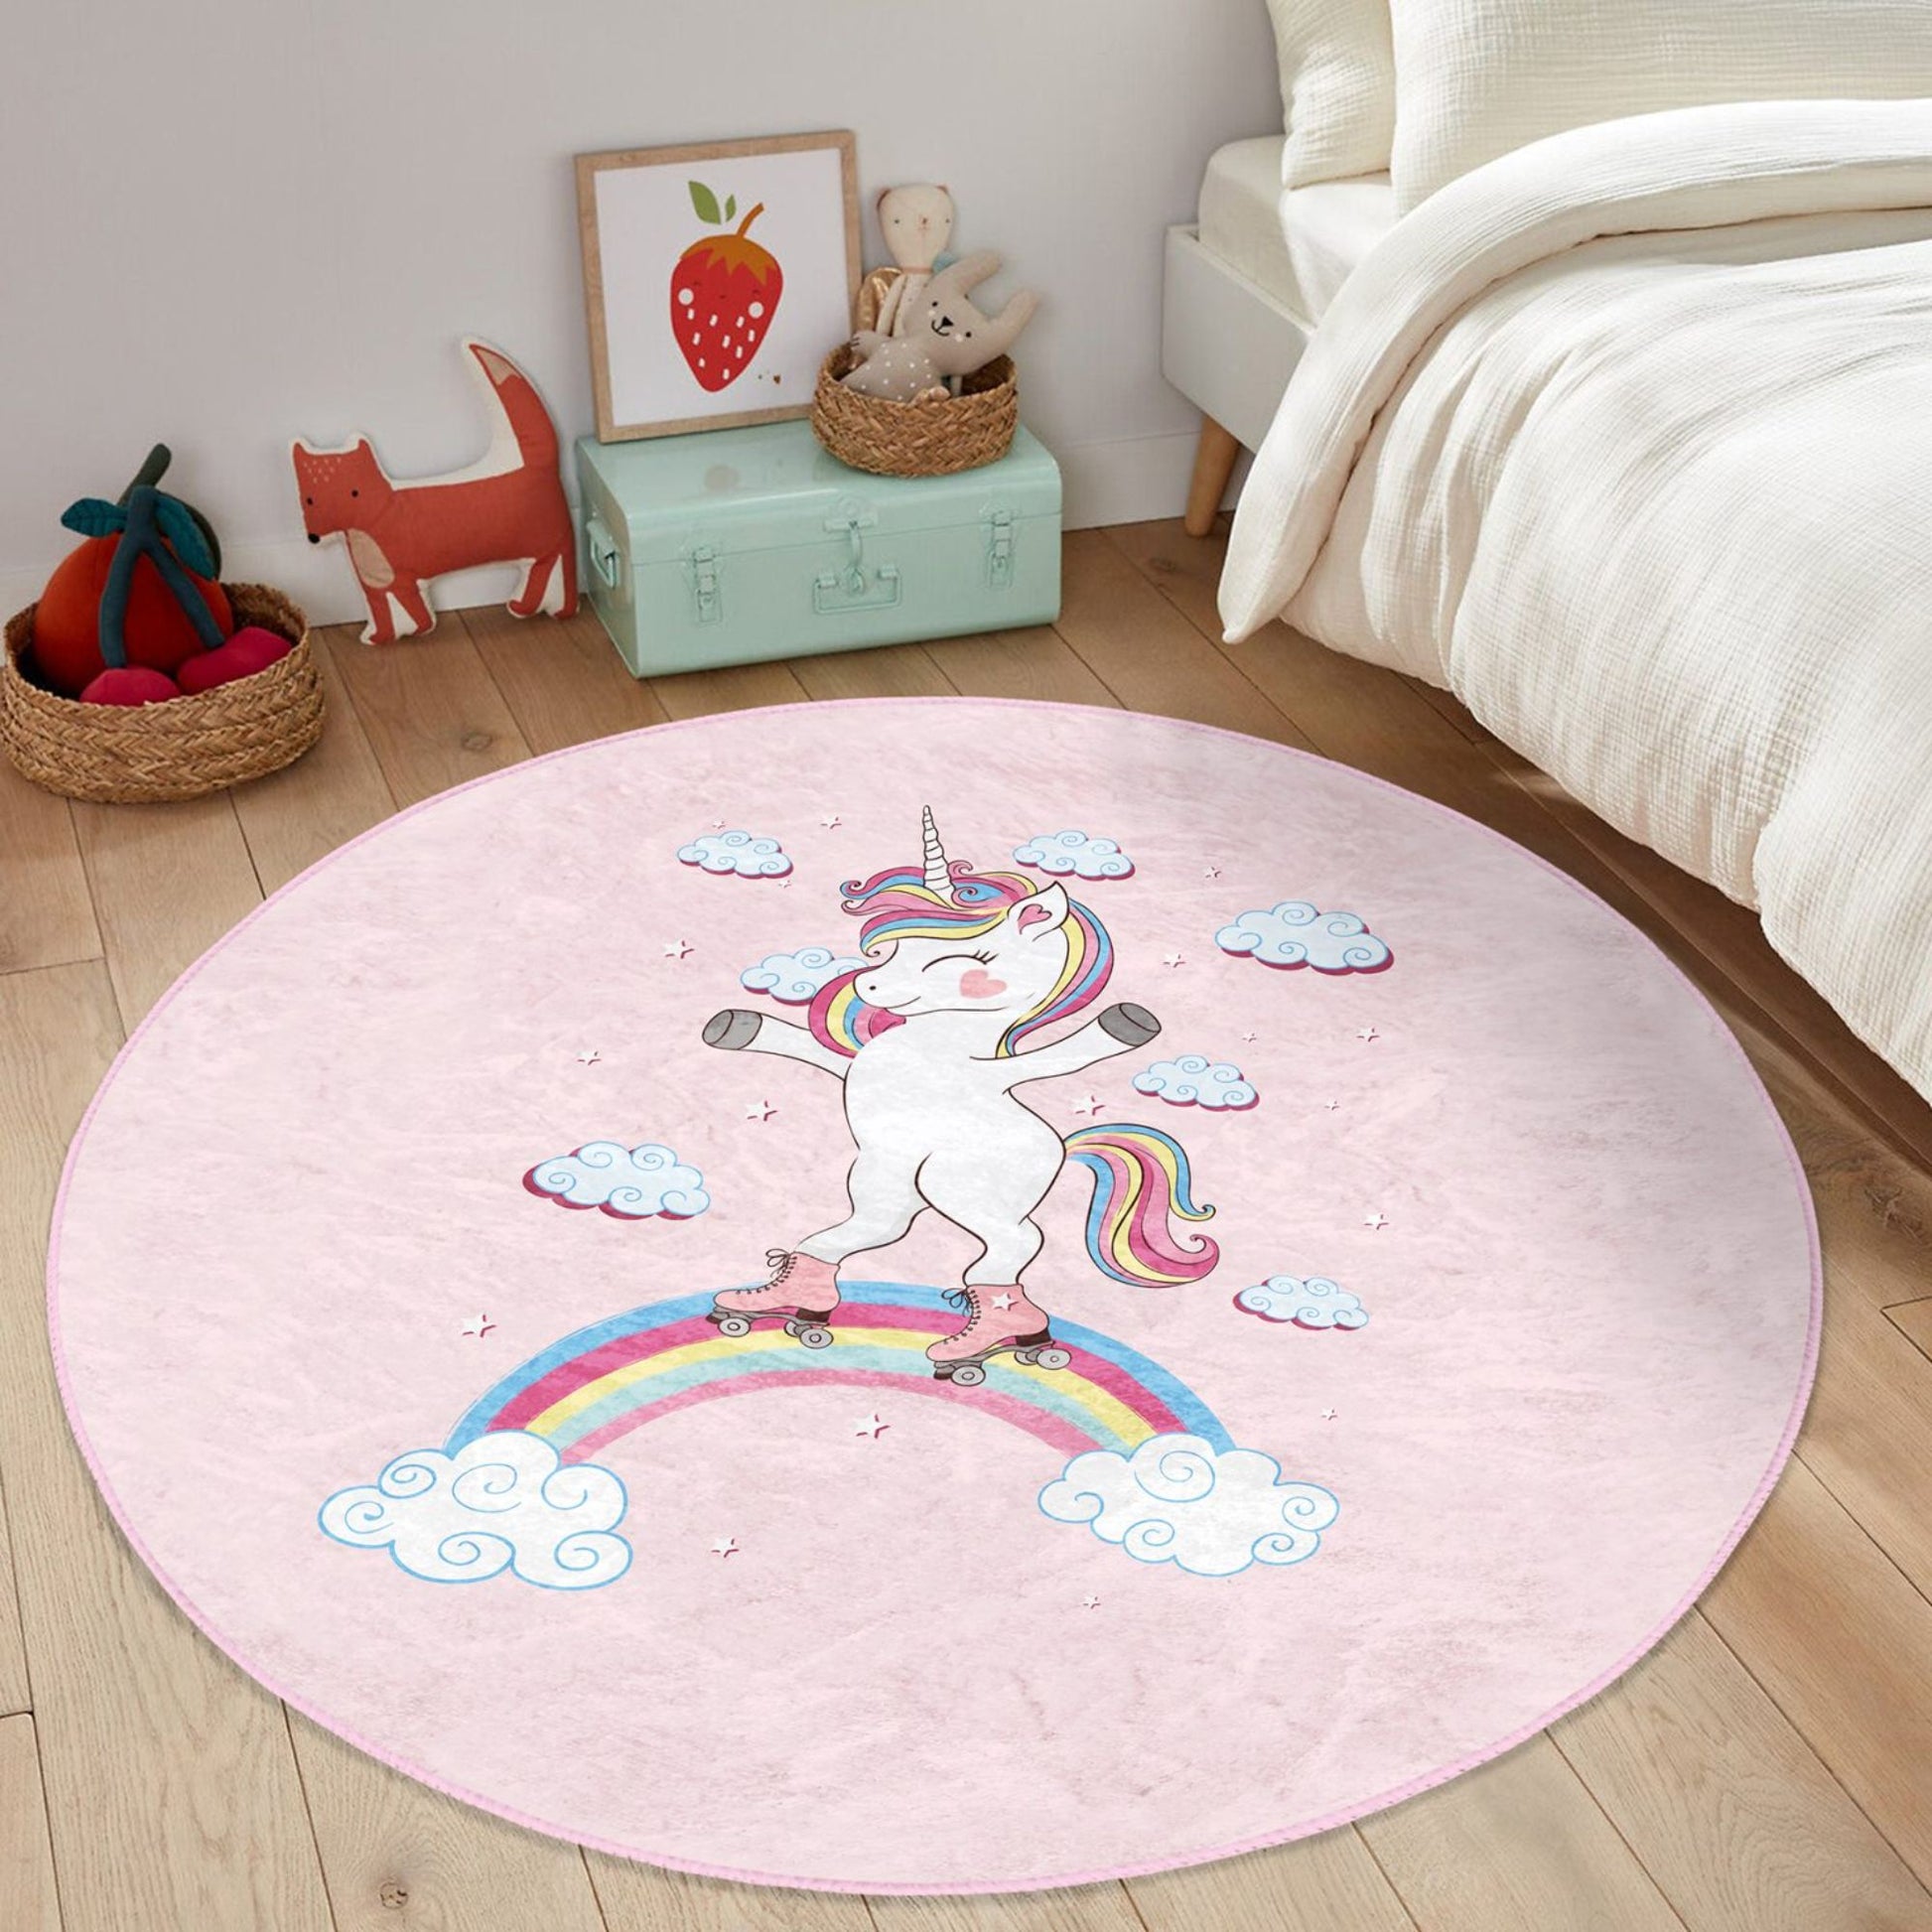 Rug with Whimsical Unicorn on Clouds Pattern for Kids